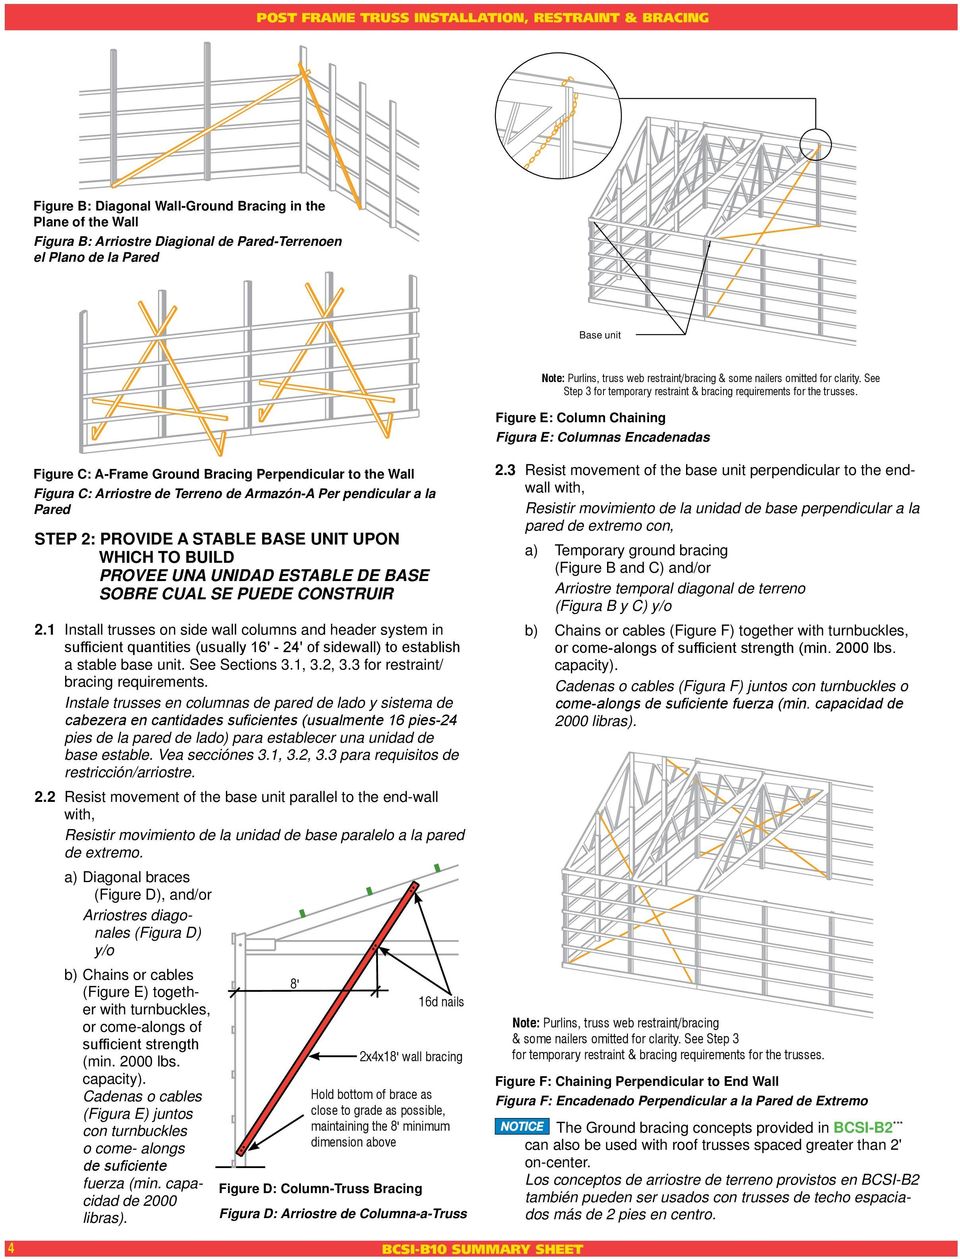 See Step 3 for temporary restraint & bracing requirements for the trusses.